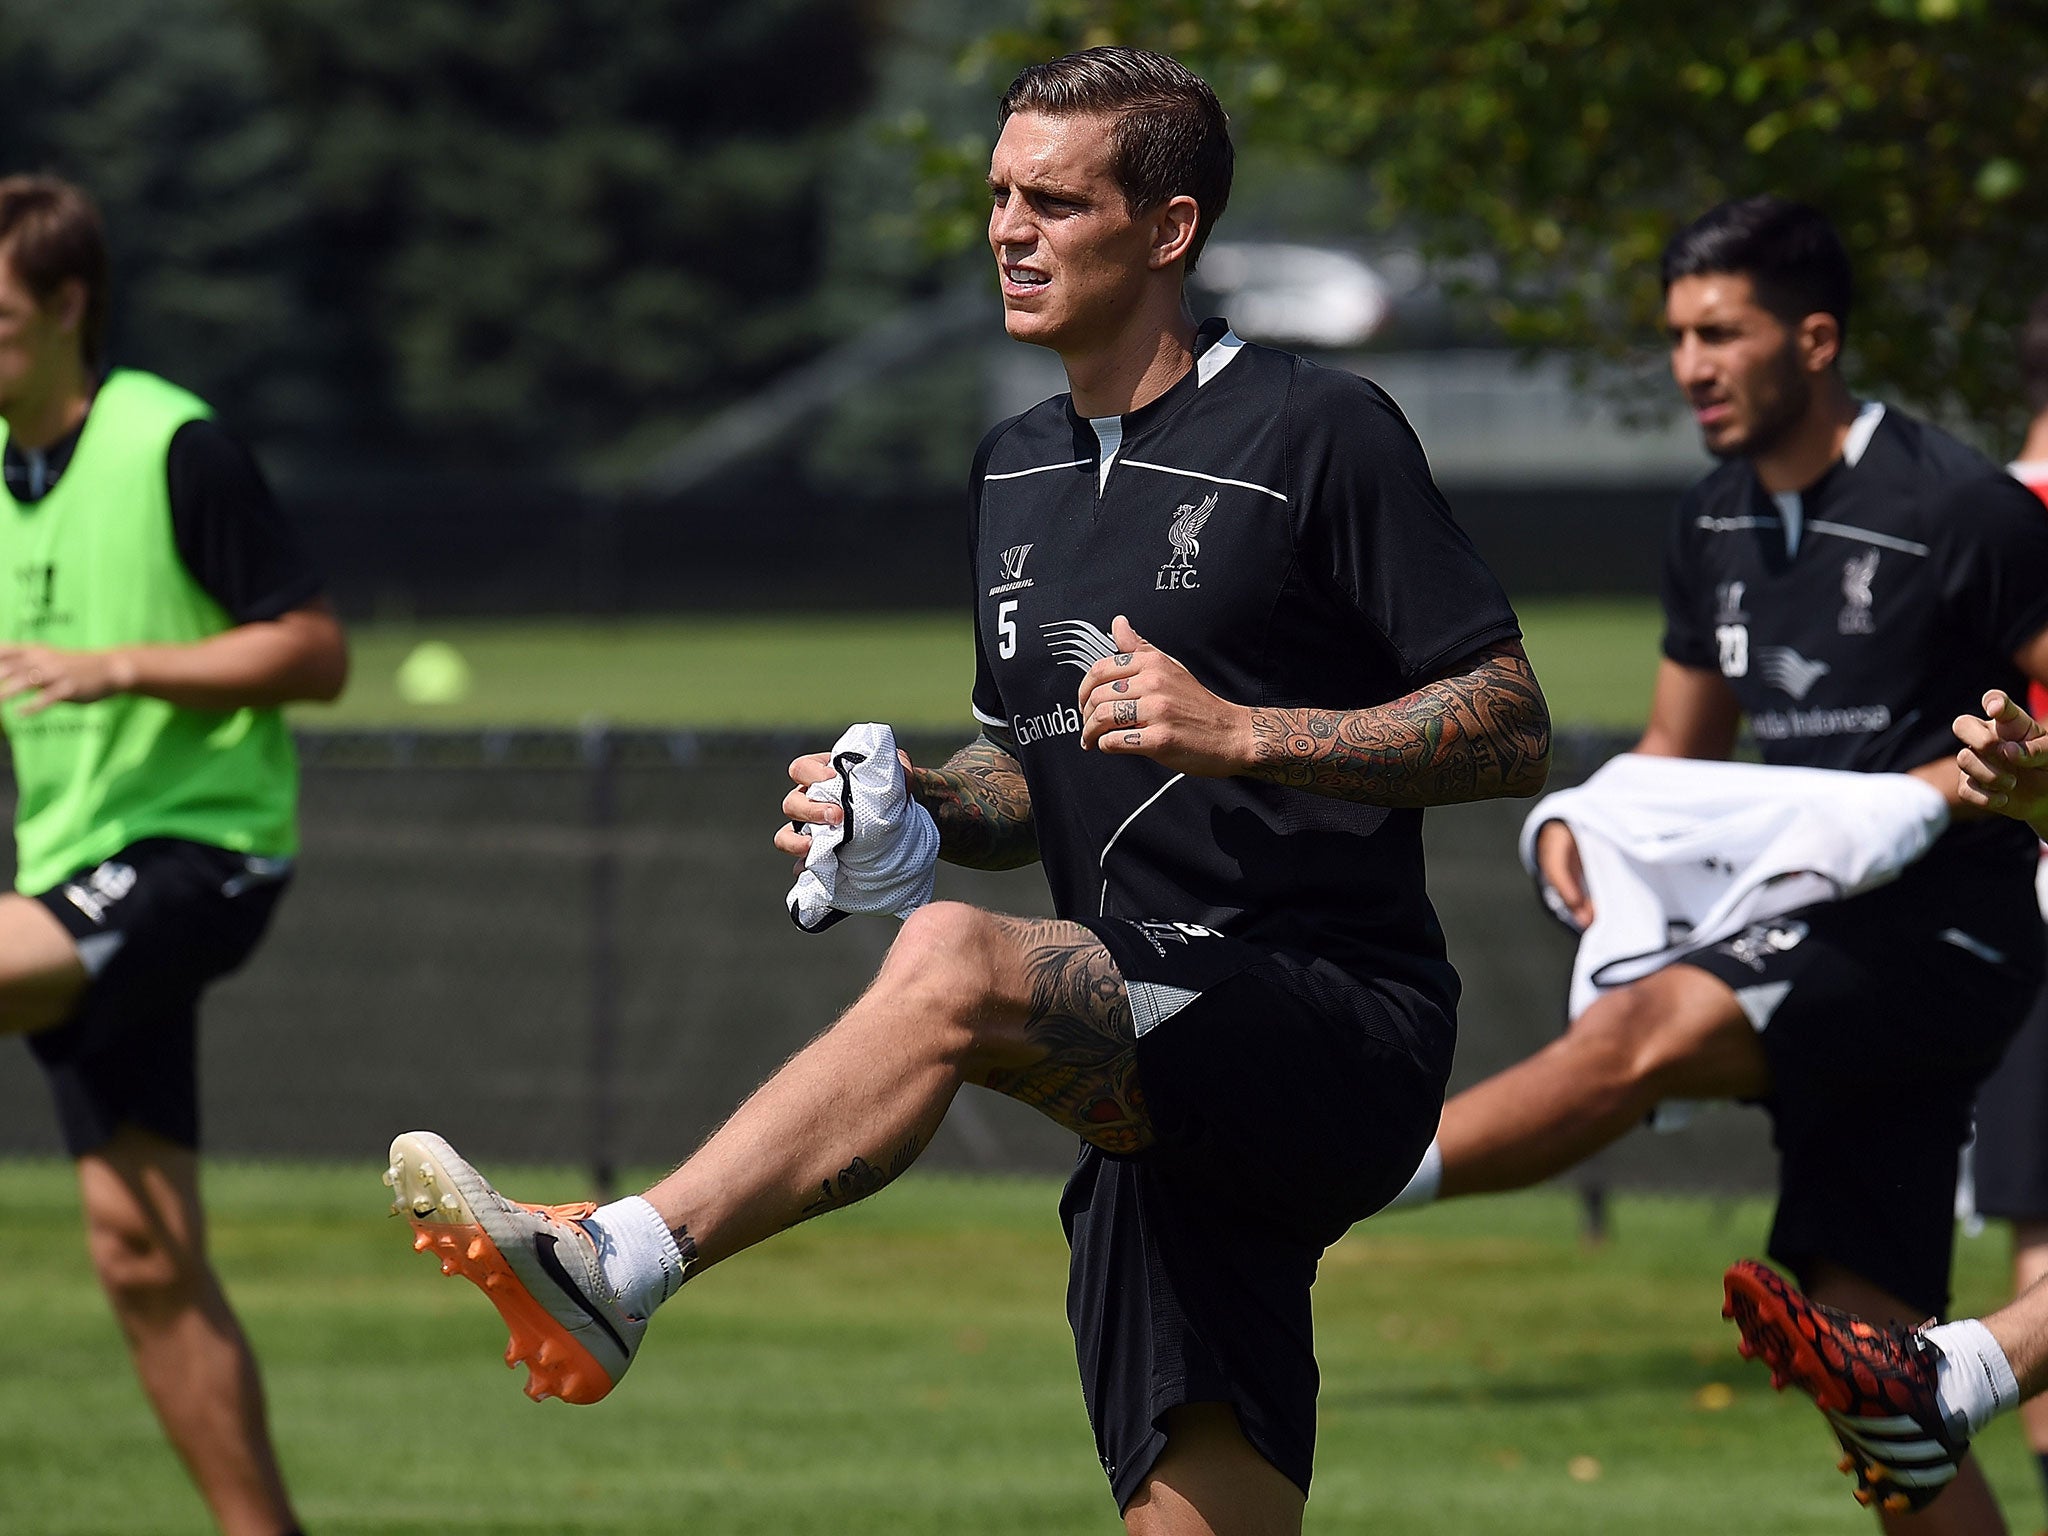 Daniel Agger in training for Liverpool last month